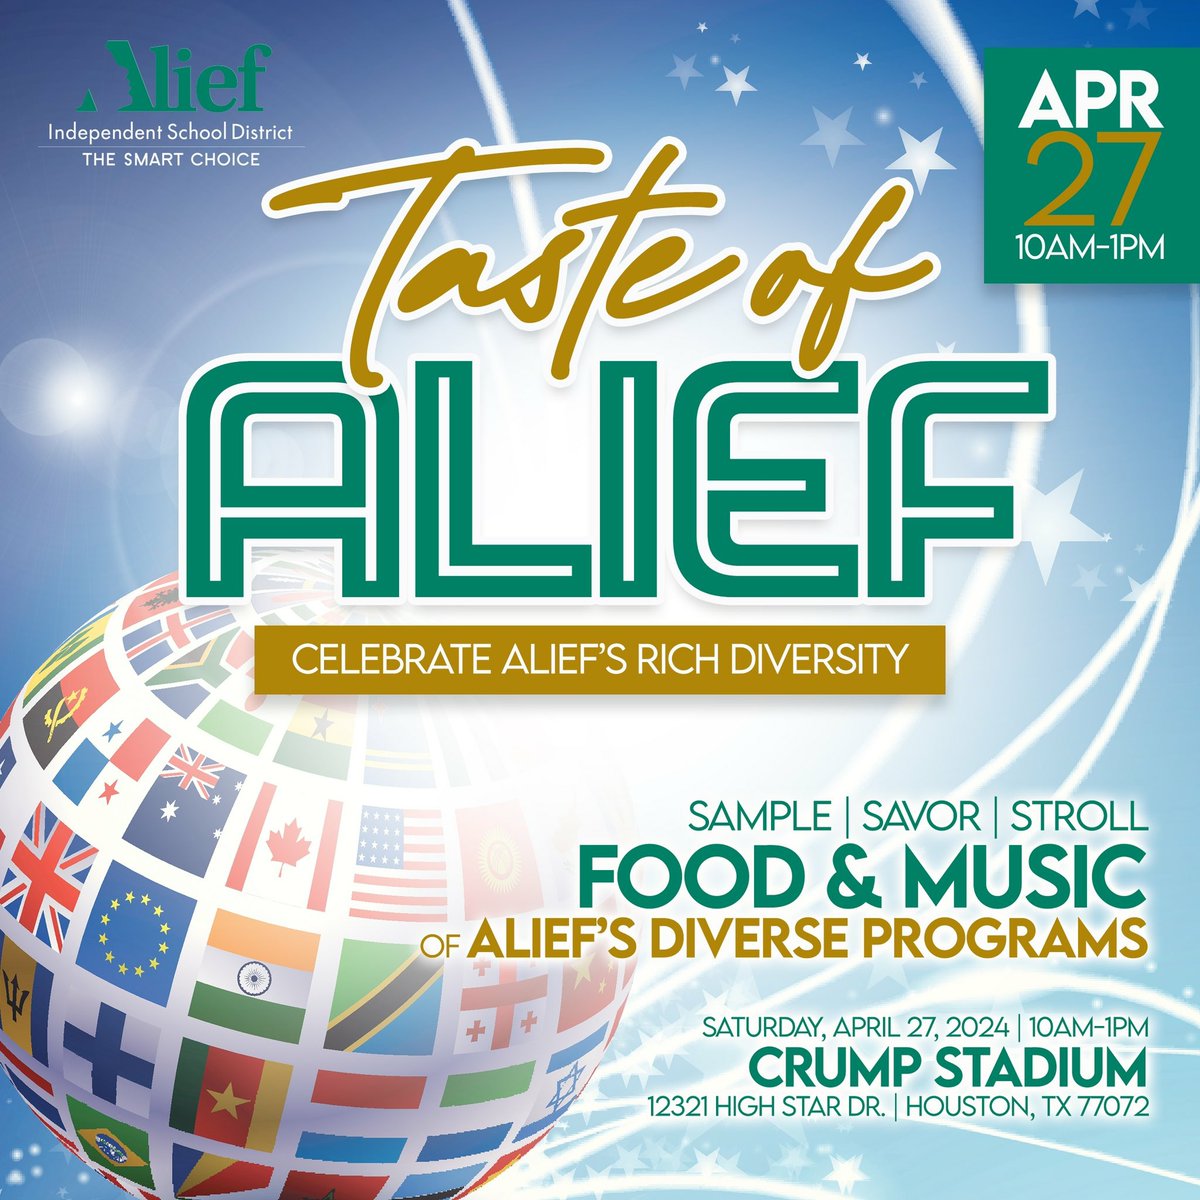 Join us for Taste of Alief! Sample, savor, and stroll through a celebration of our vibrant community's diversity at Crump Stadium on Saturday, April 27, from 10 am to 1 pm. Don't miss out on the delicious food and fantastic music! #TasteOfAlief